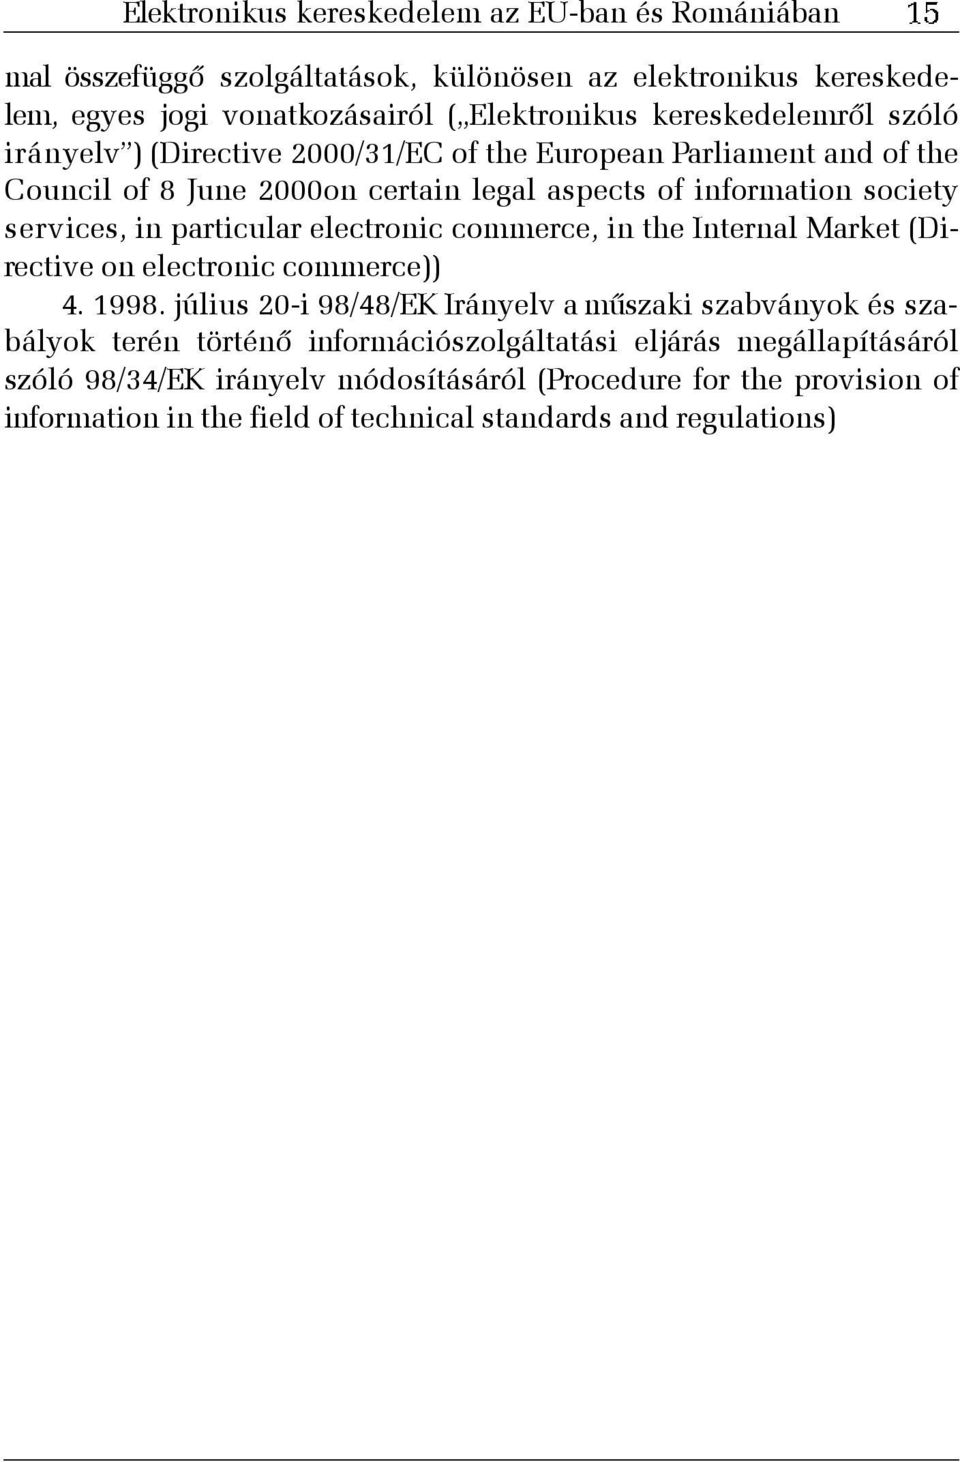 in particular electronic commerce, in the Internal Market (Directive on electronic commerce)) 4. 1998.